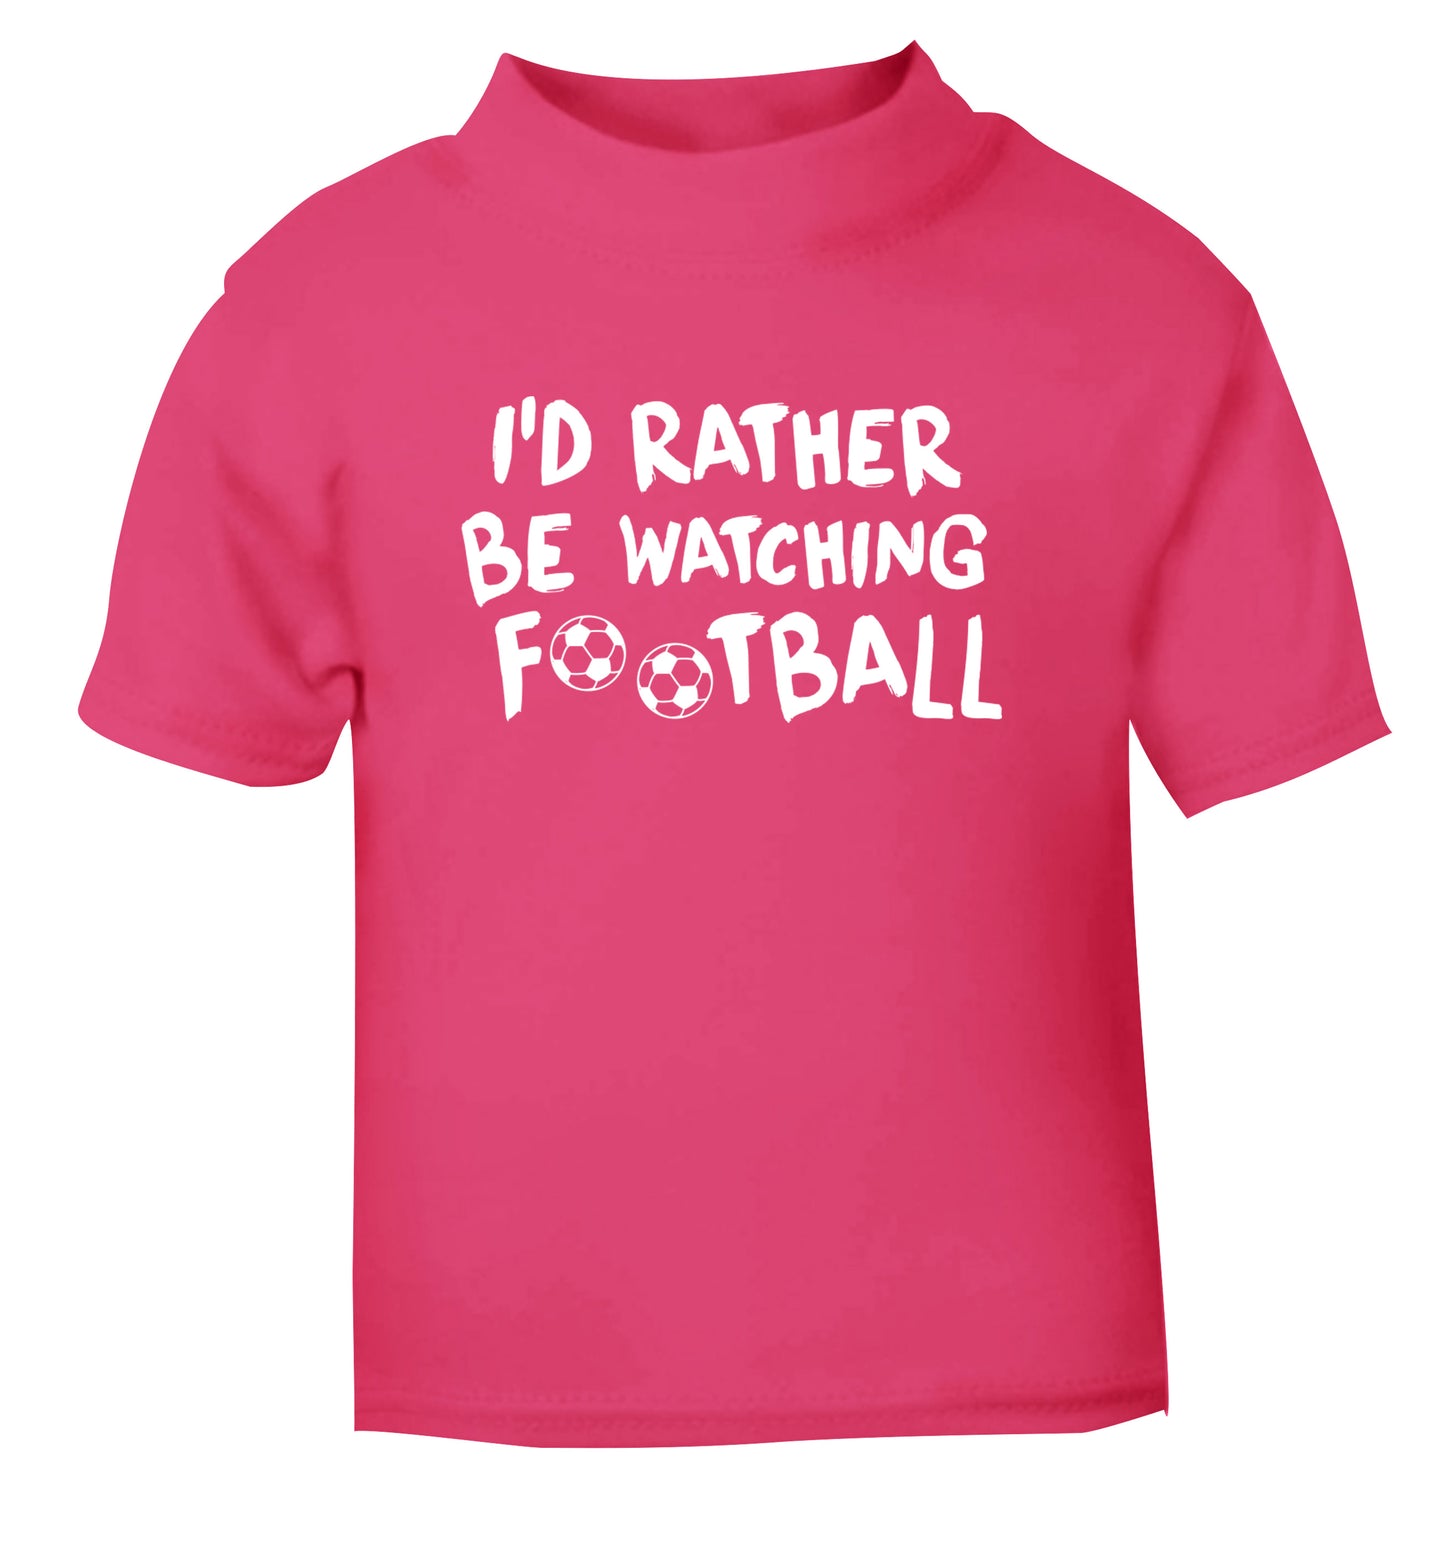 I'd rather be watching football pink Baby Toddler Tshirt 2 Years